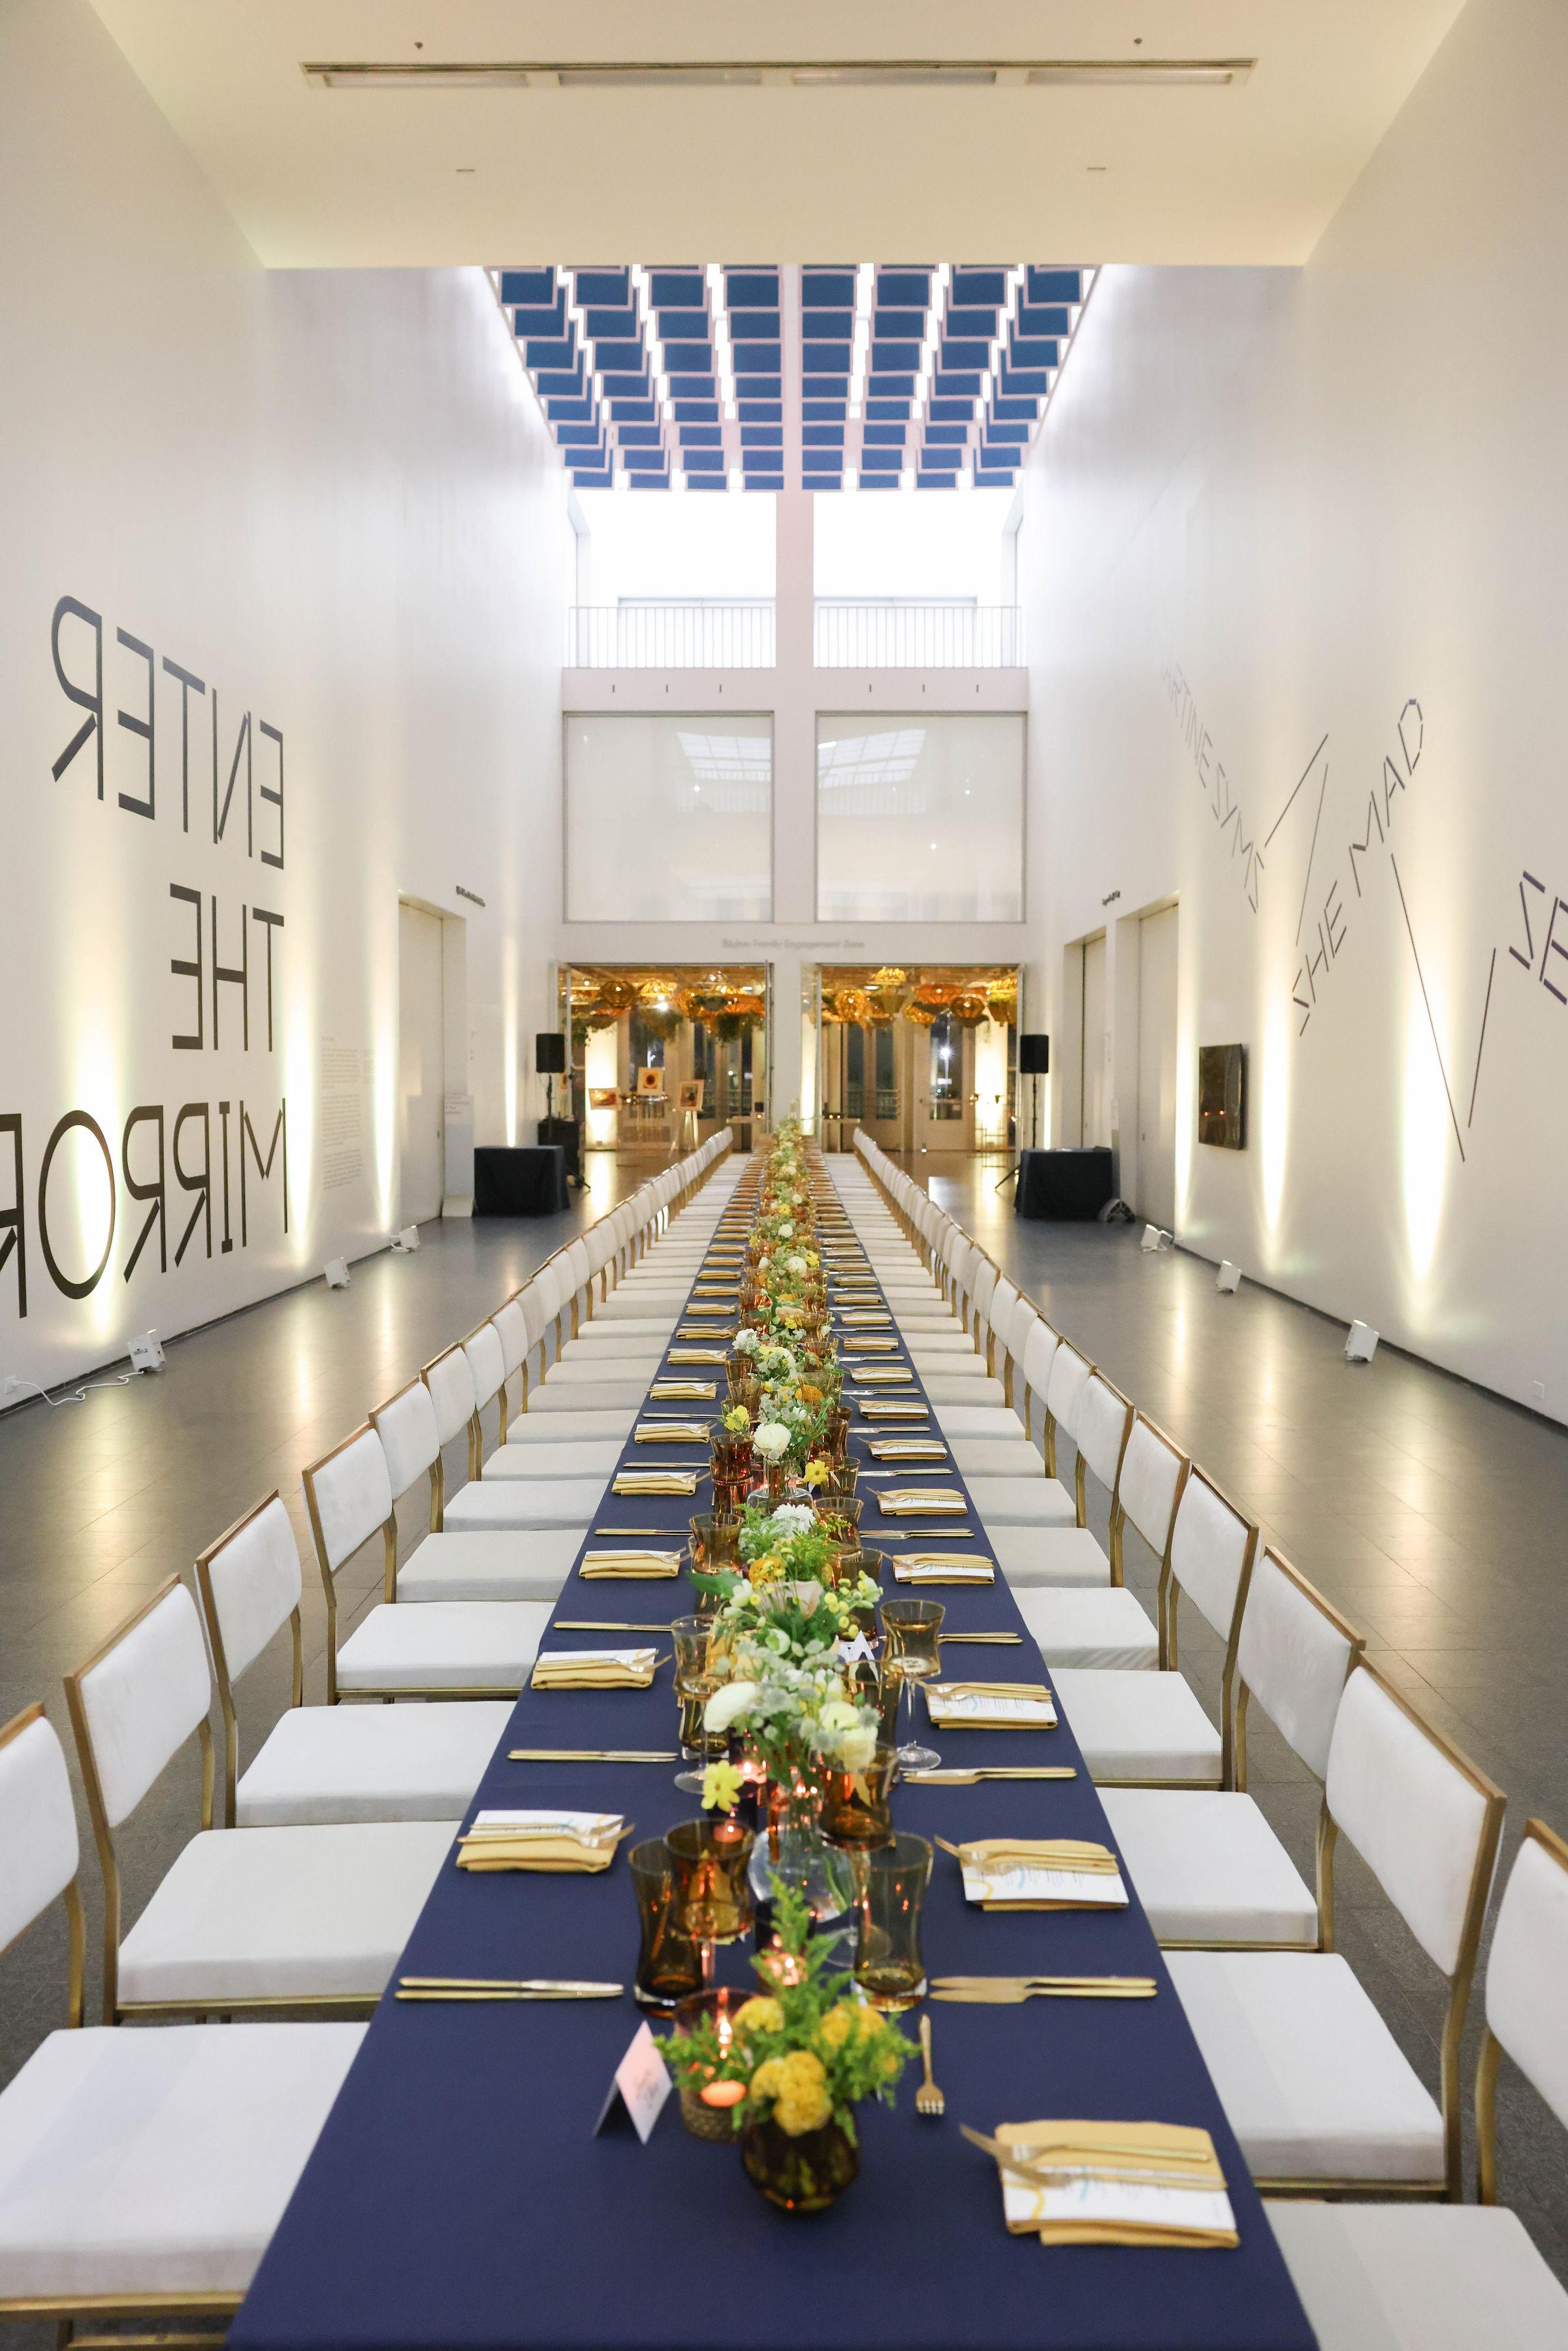 Long table neatly set for an event